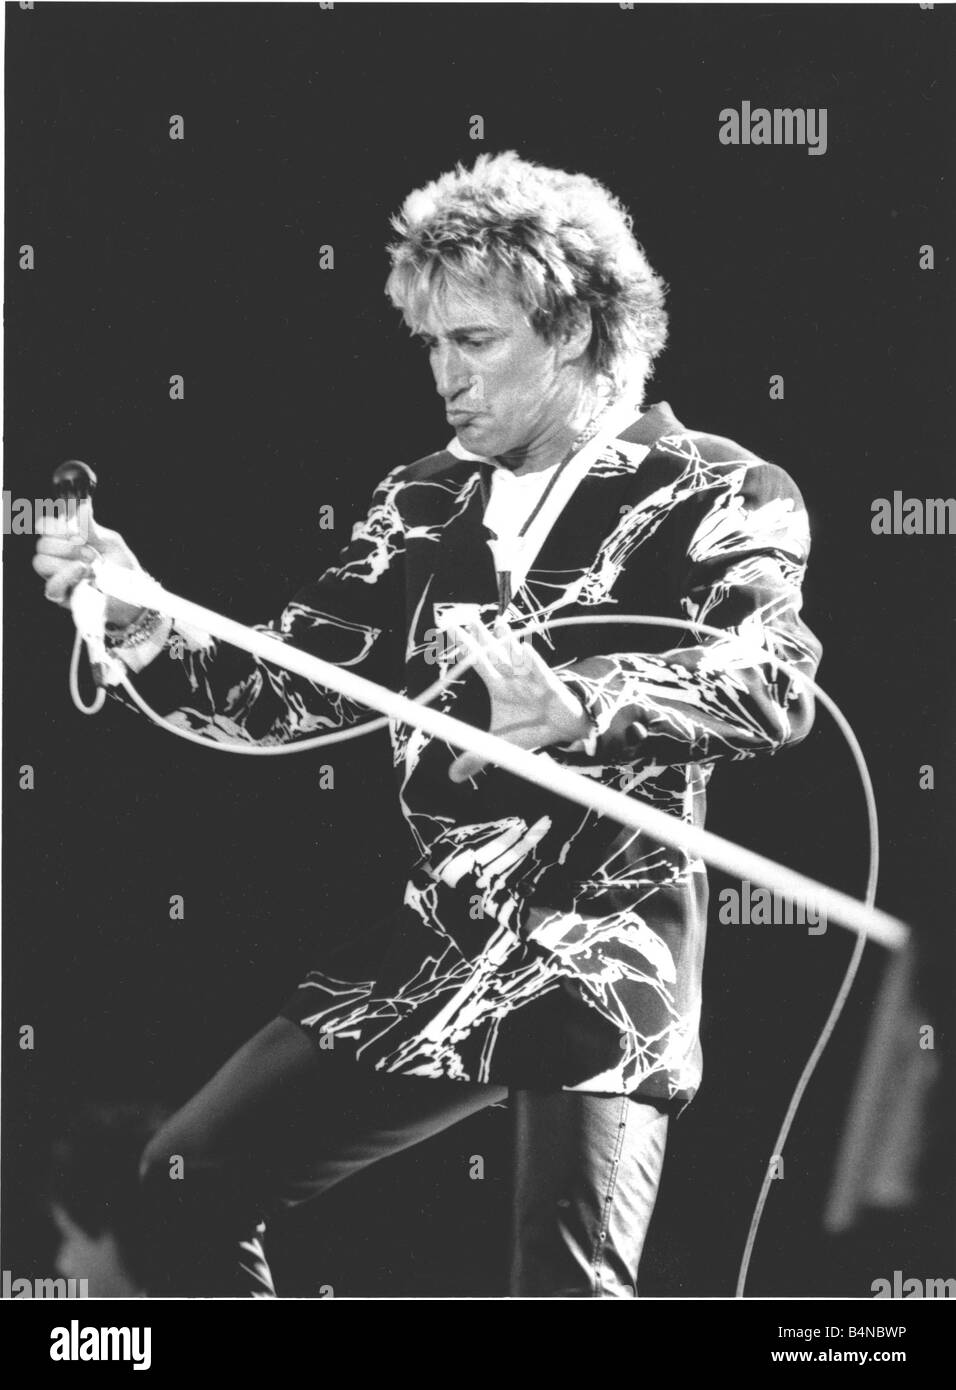 Veteran Rocker Rod Stewart went down a storn at Wembley Stadium on 15 July 1986 and so did the rain Rod sang to a sea of umbrellas during an emotional reunion with his old backing band The Faces The band watched by 60 000 fans played together for the first time in 13 years The concert was staged to raise money for a new clinic for victims of multiple sclerosis the disease that struck down former Faces guitarist Ronnie Lane Stock Photo